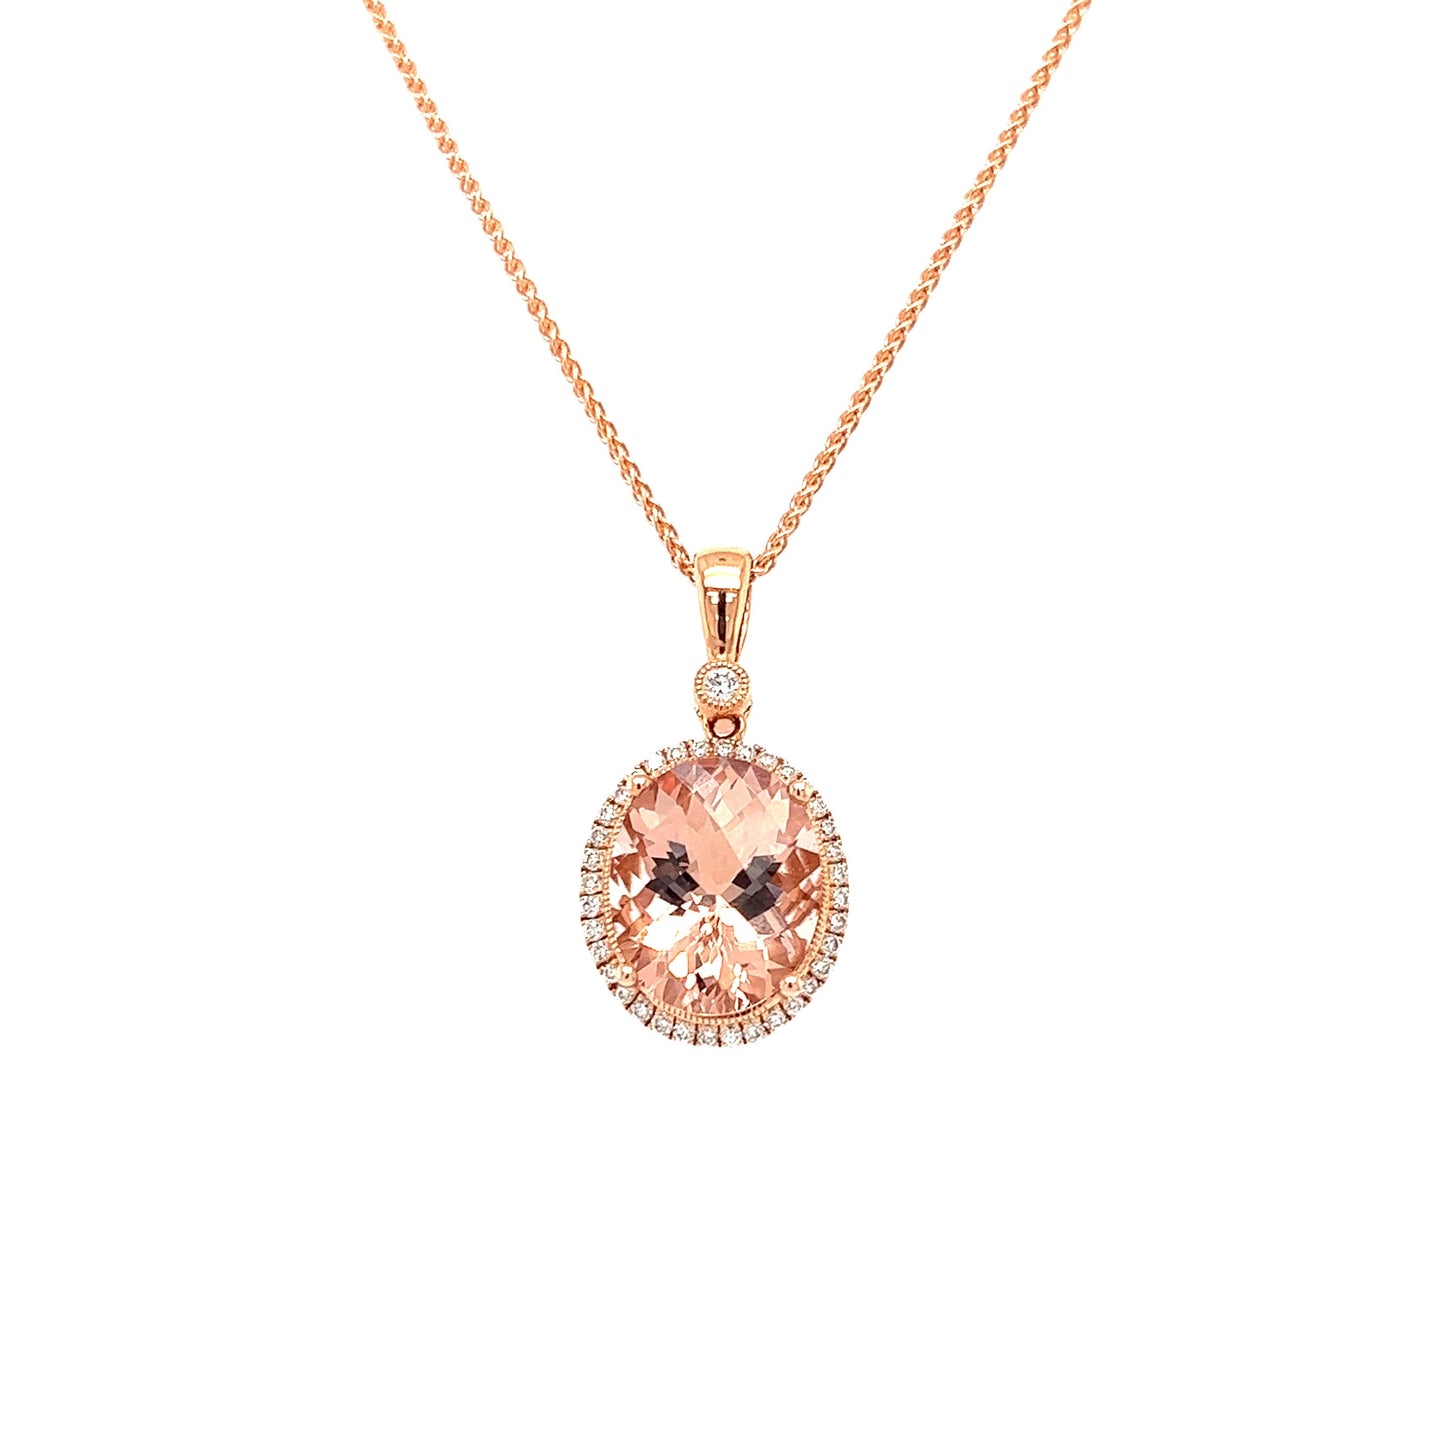 Oval Morganite Necklace with Diamond Halo in 14K Rose Gold Chain and Pendant View